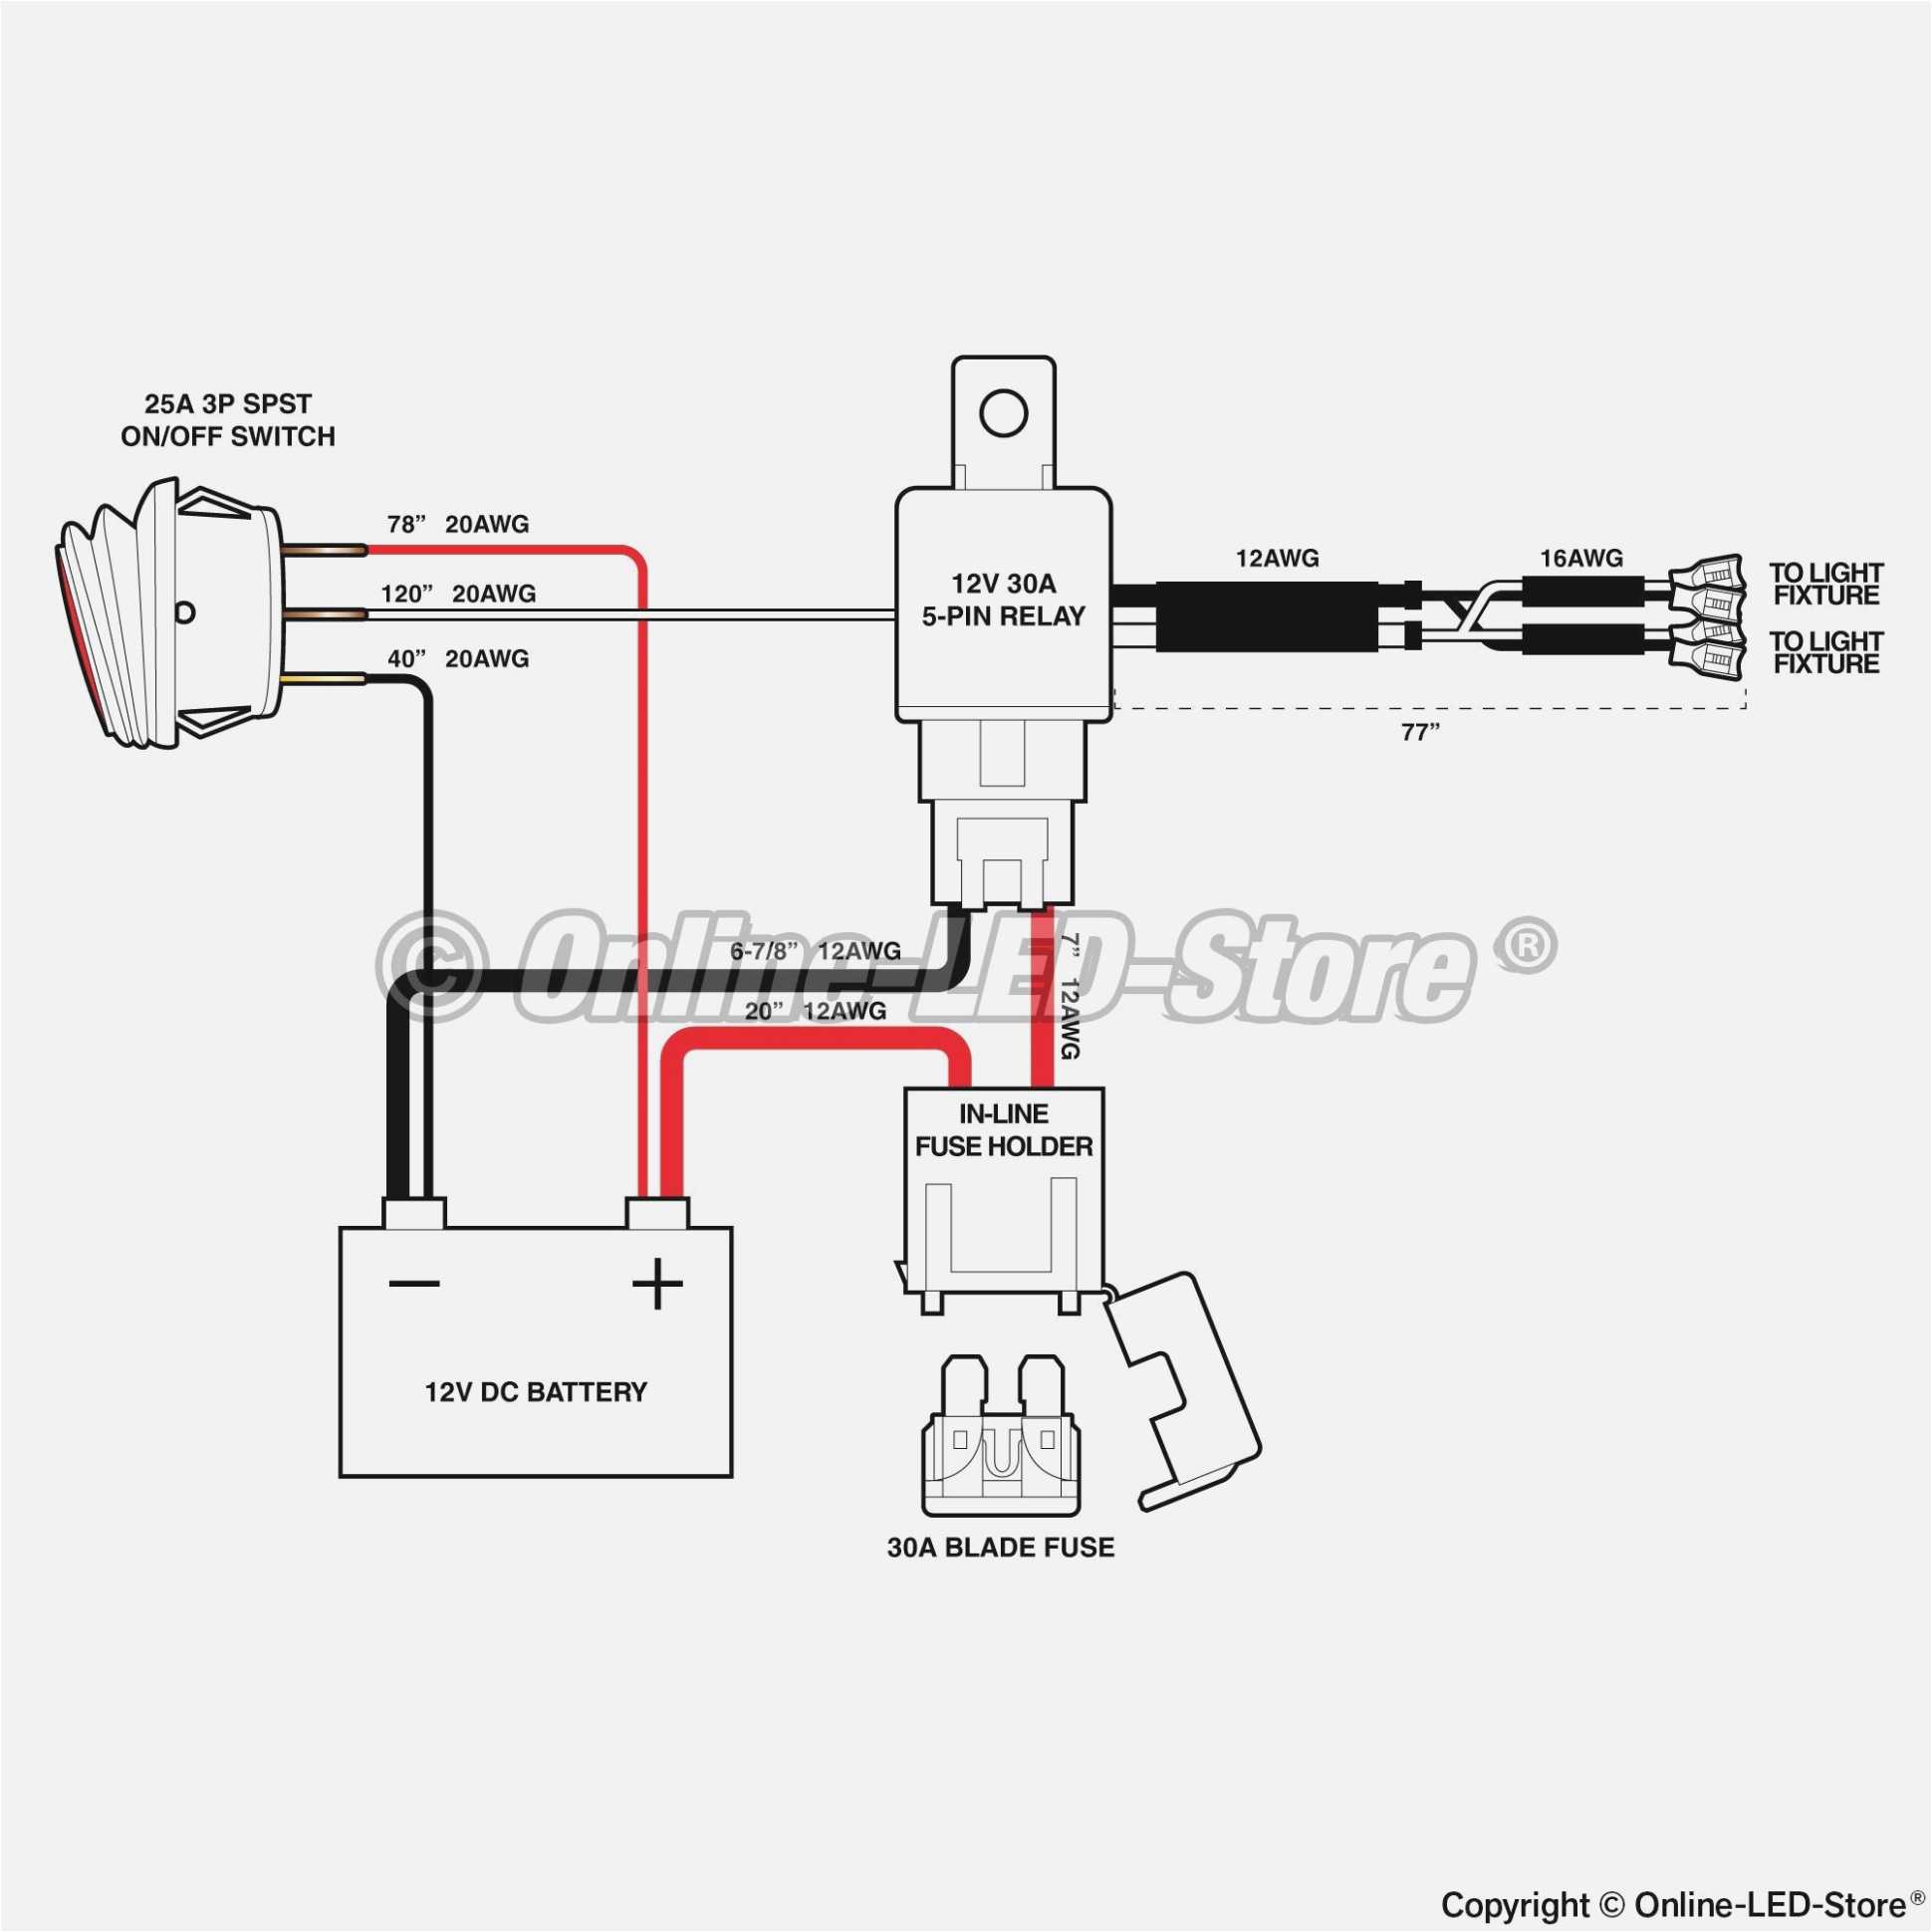 12v socket wiring diagram free picture schematic wiring diagram sort 12v socket wiring diagram free picture schematic